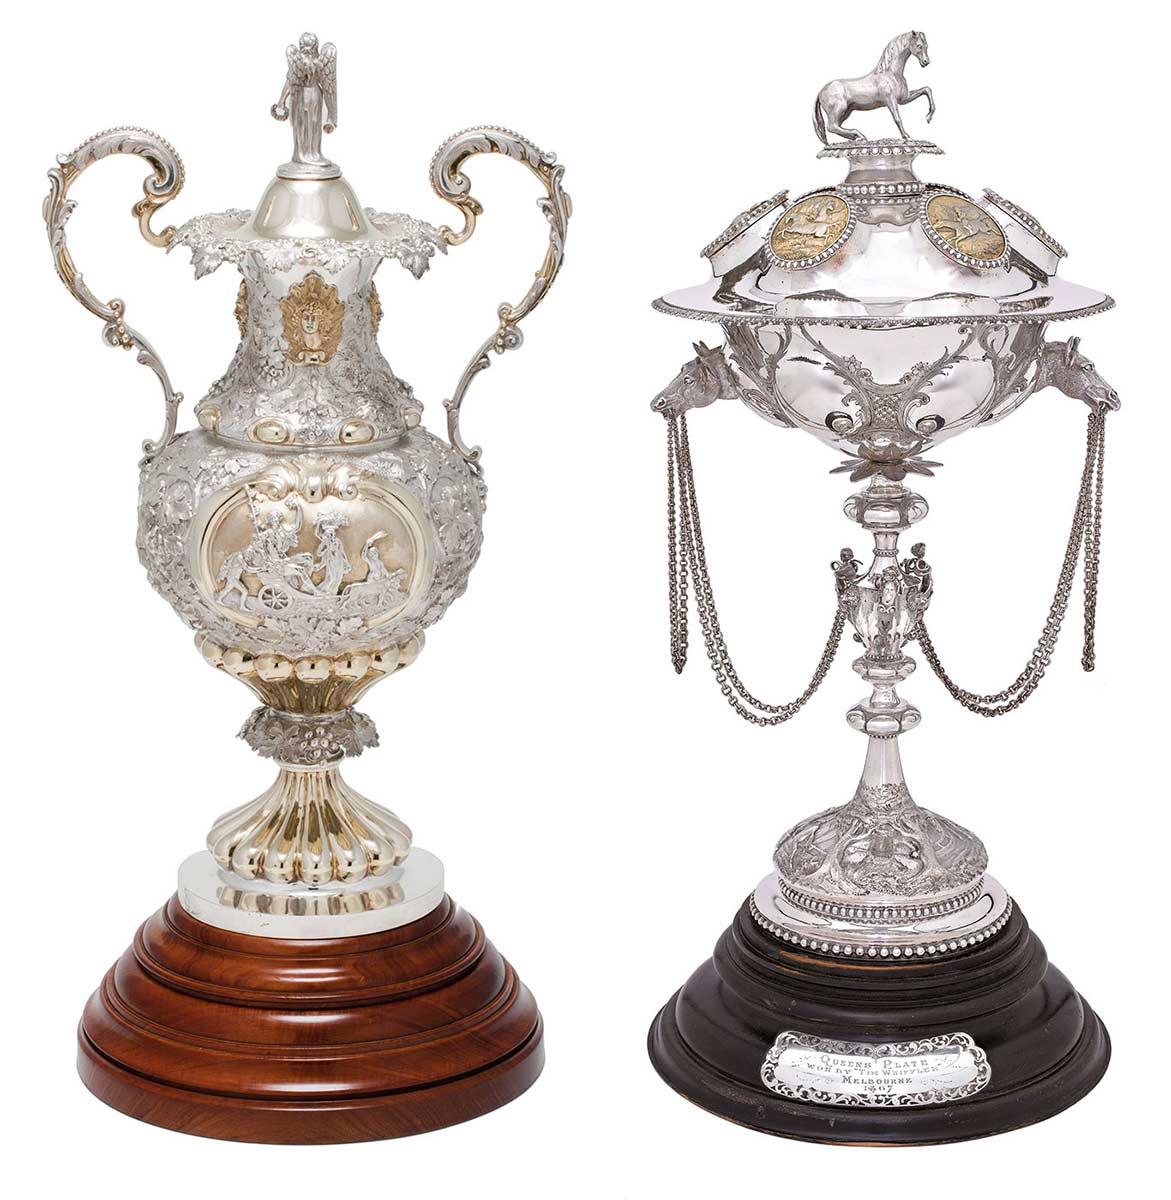 The Melbourne Cup trophy is mostly silver with two ornate handles and mounted on a wooden base. The Queen's Plate trophy has a horse on the top standing a rounded silver globe mounted on a long stem. Chains are draped from the globe.